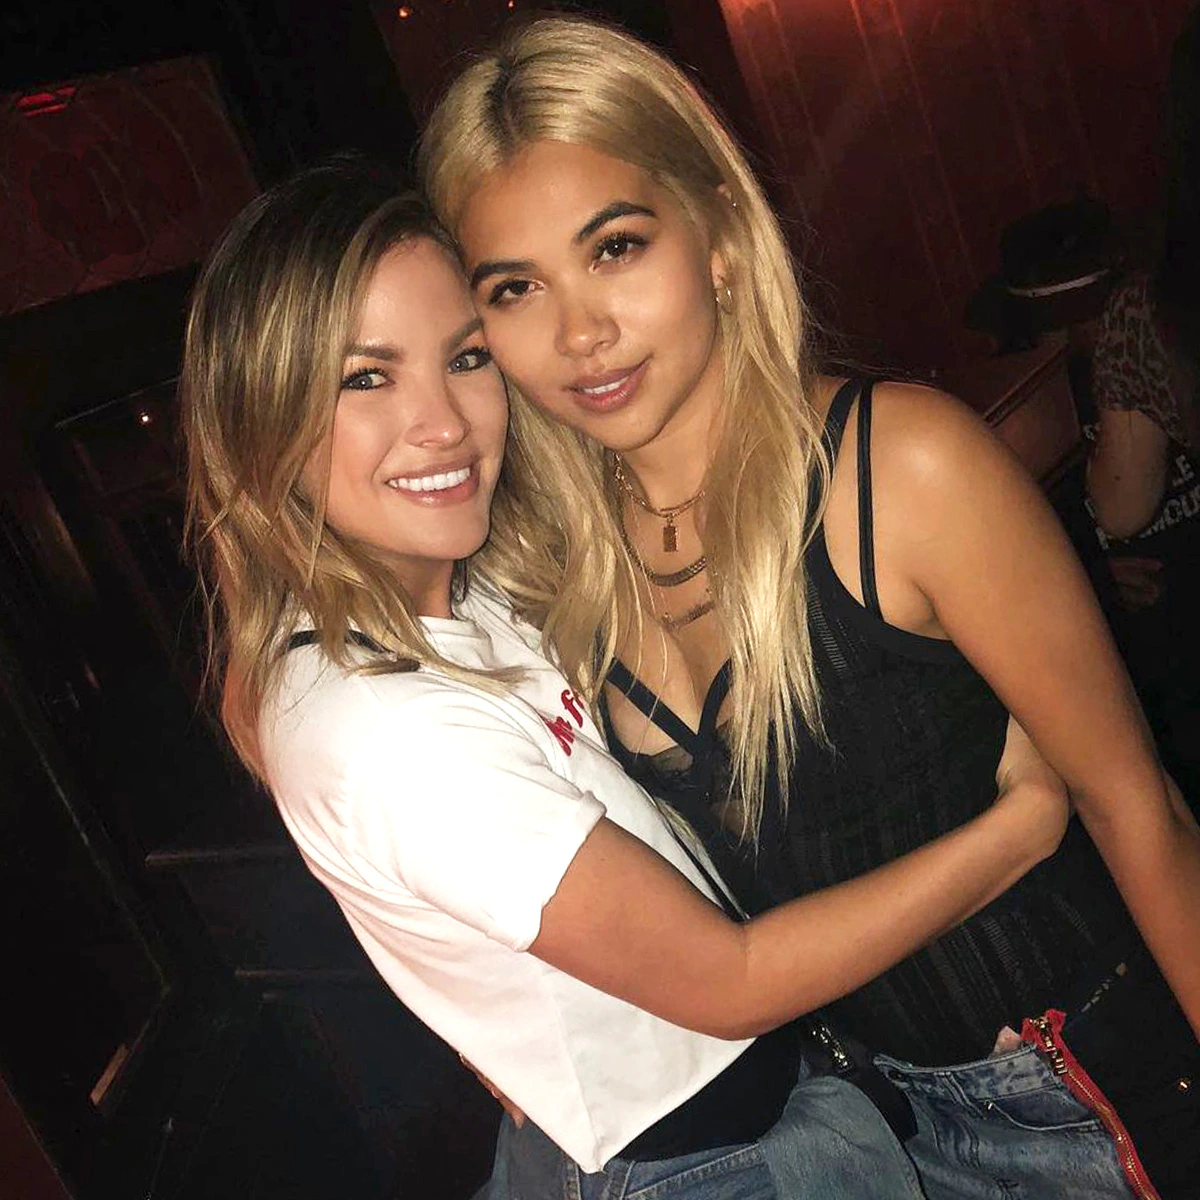 I Don't Want Anyone to Think I Was Ashamed, Says Becca Tilley About Keeping Relationship with Hayley Kiyoko Private